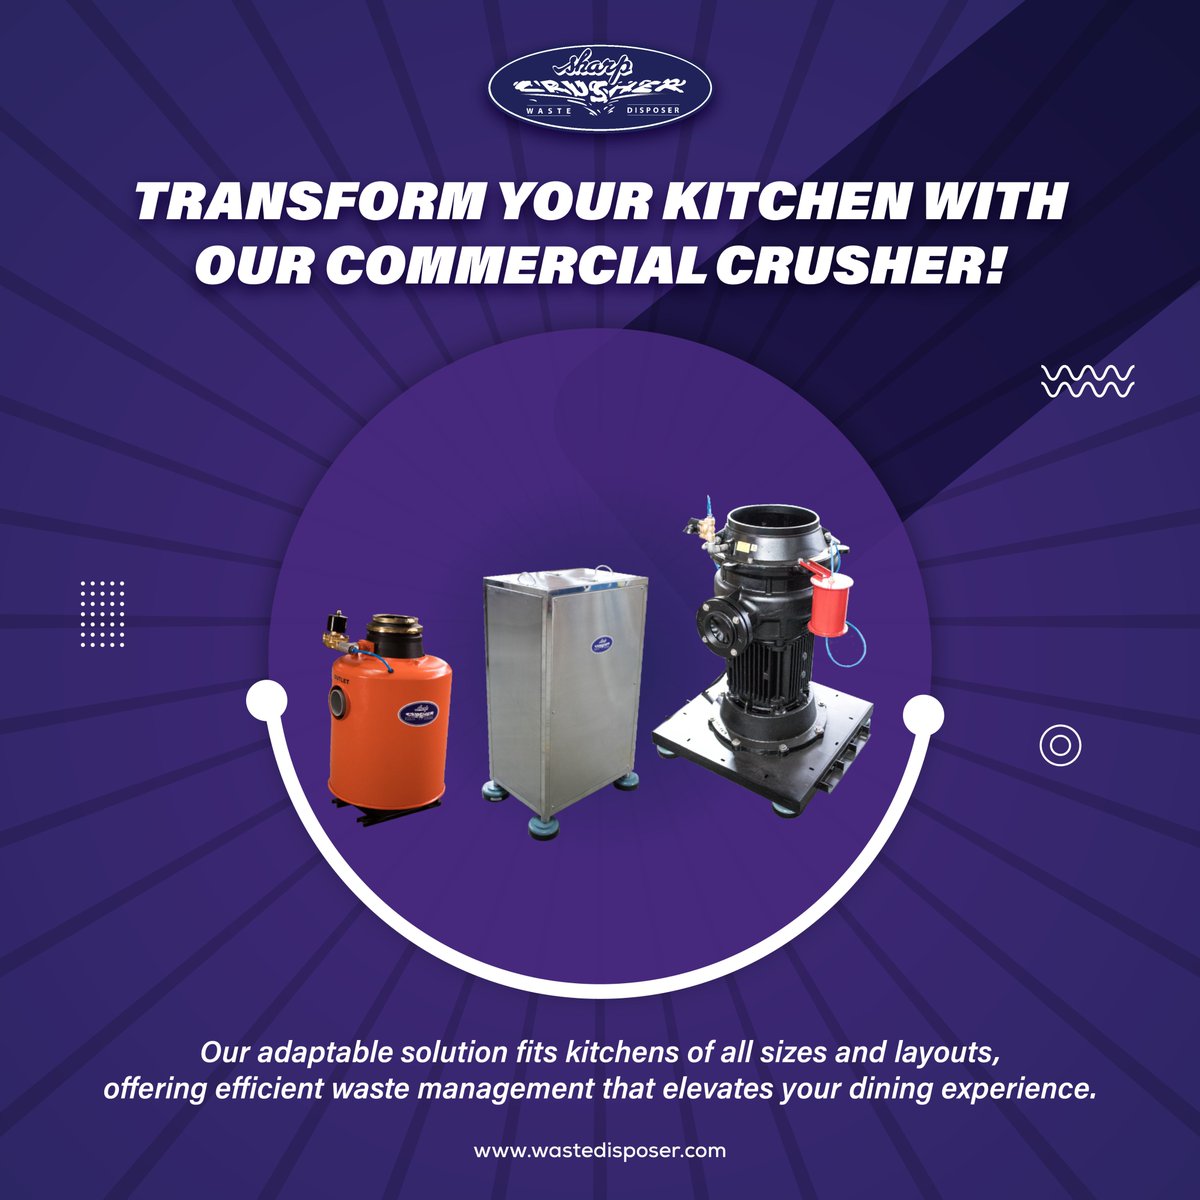 Transform your #CommercialKitchen with #SharpCrusher's Commercial Crusher!
 
 Explore our solutions at wastedisposer.com or #shopnow at: shorturl.at/sxBC7
 
#commercialcrusher #WasteDisposer #CommercialKitchen #catering #canteen #hostel #hotel #foodwaste #kitchen